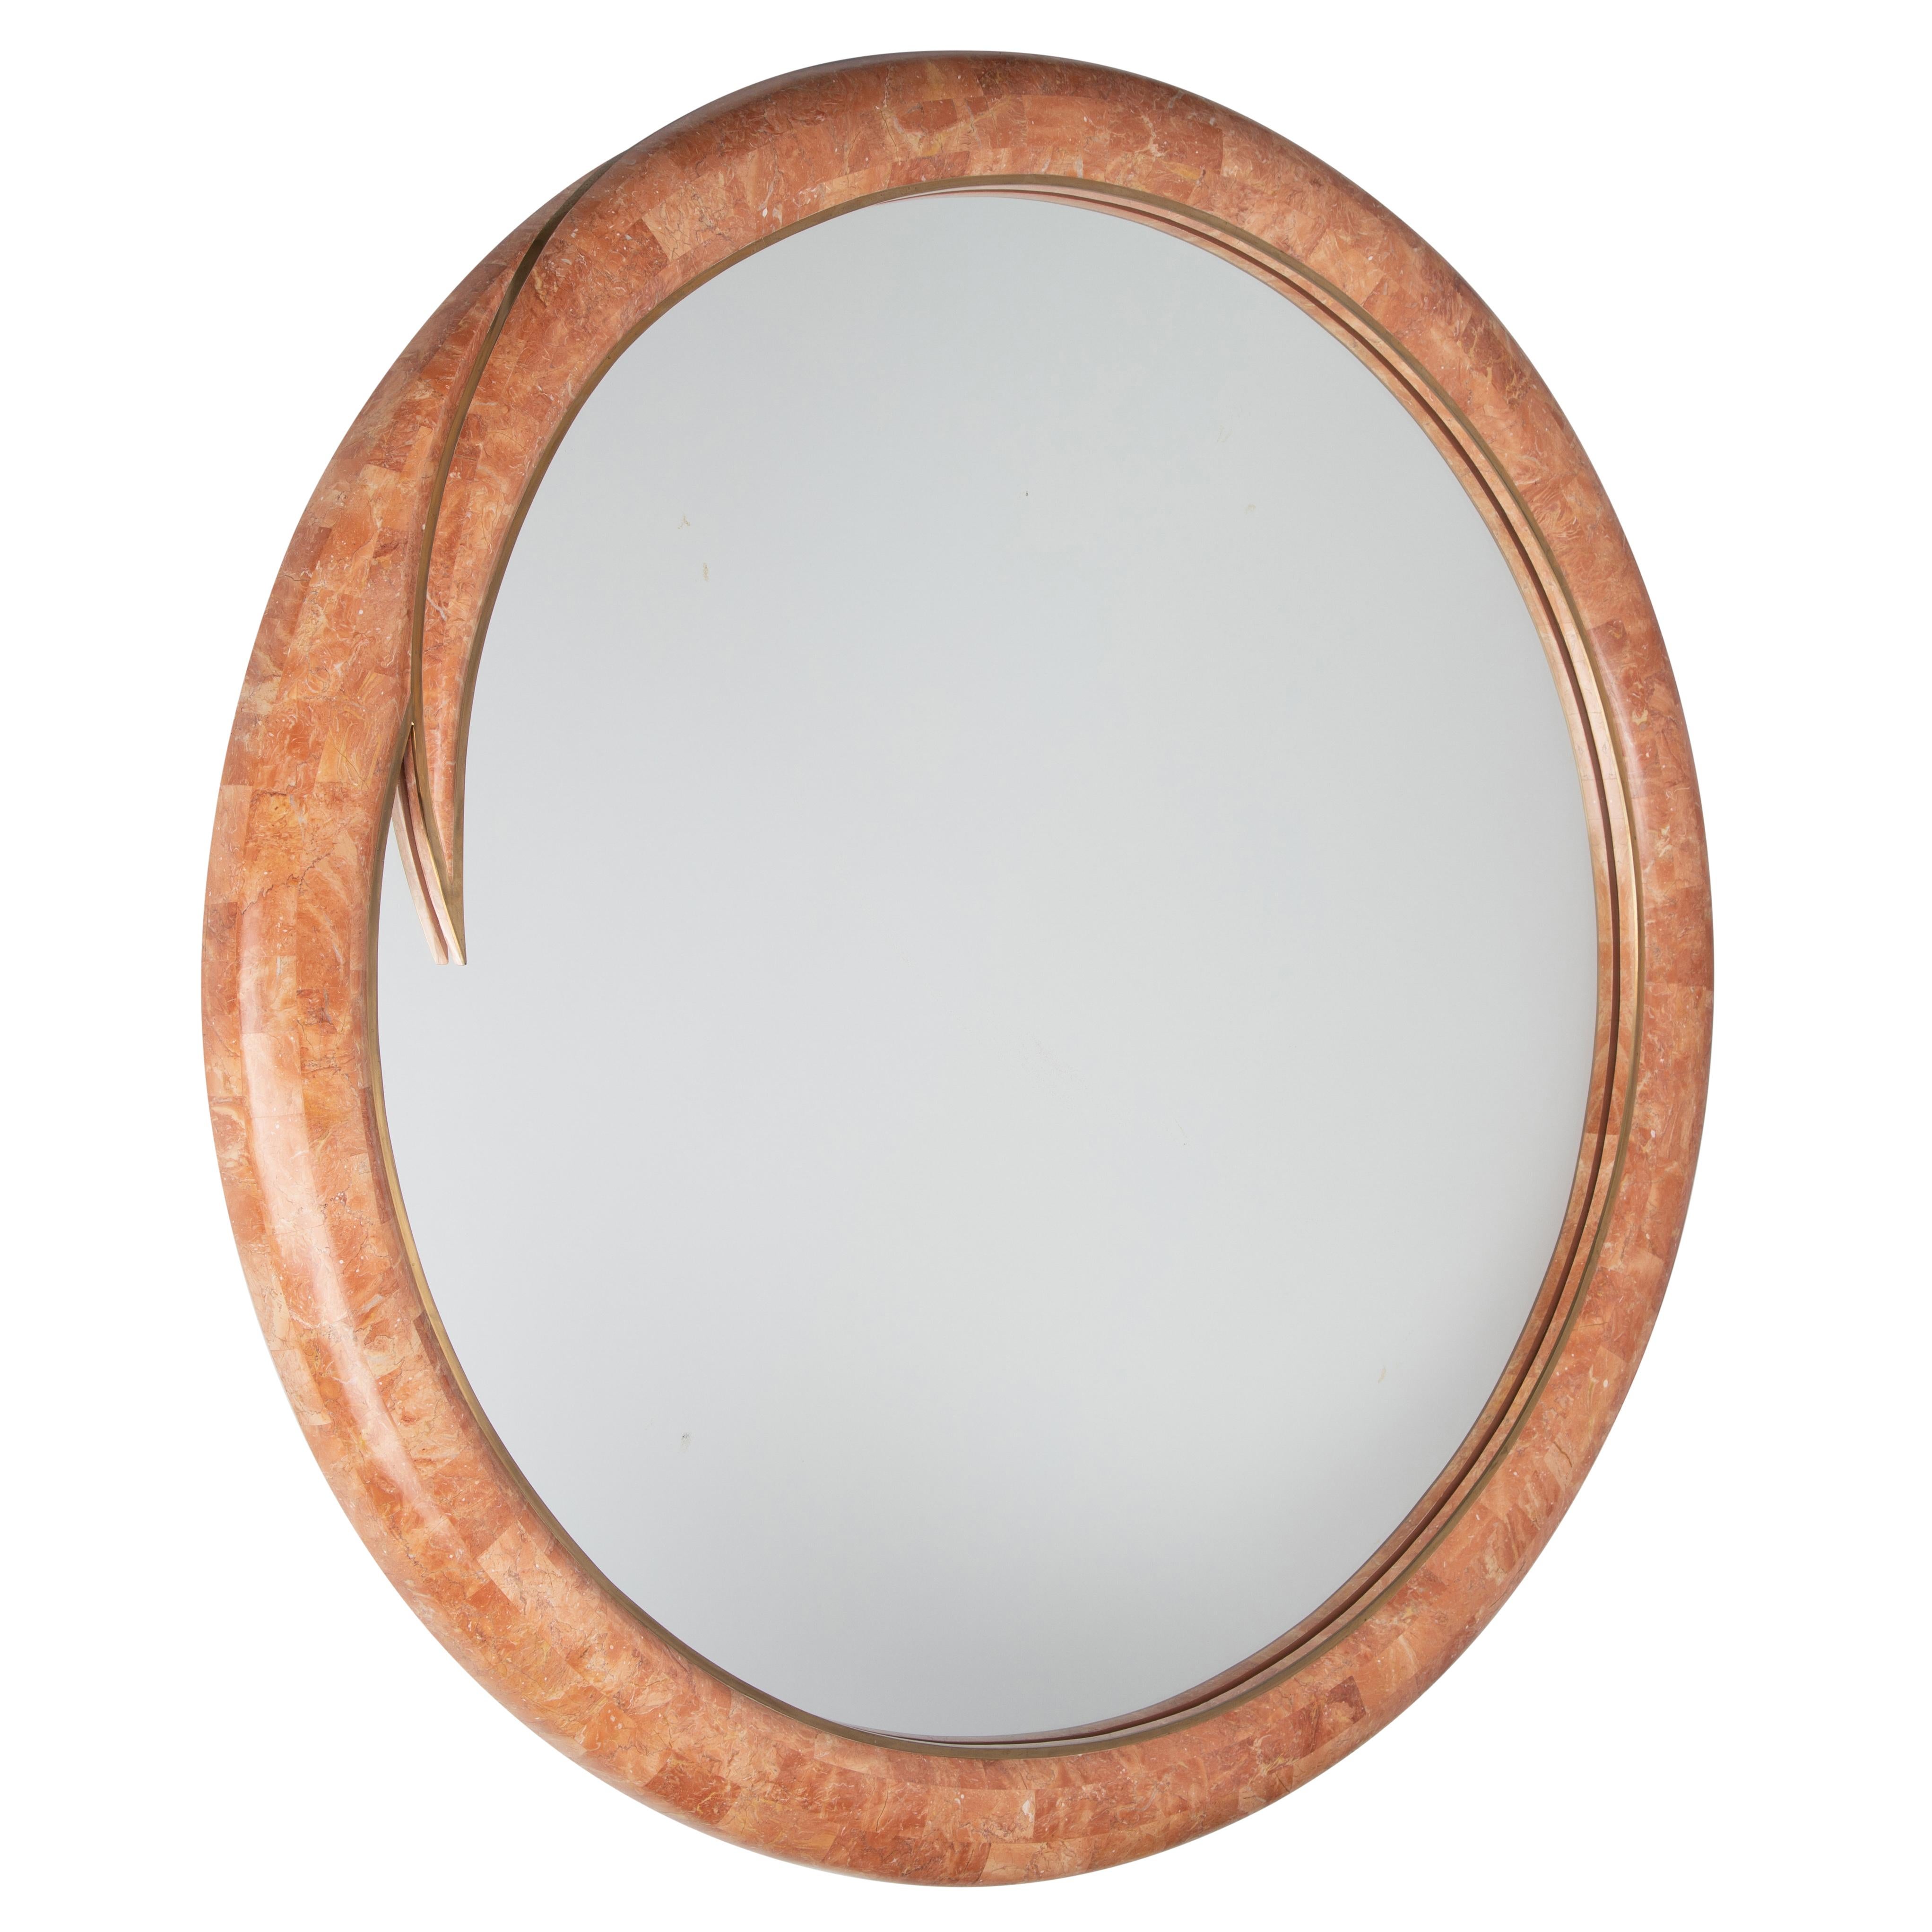 This Maitland Smith mirror features a rounded wooden frame covered in coral-color tessellated marble with an inner band of brass trim. The circular form resolves in a whimsical 